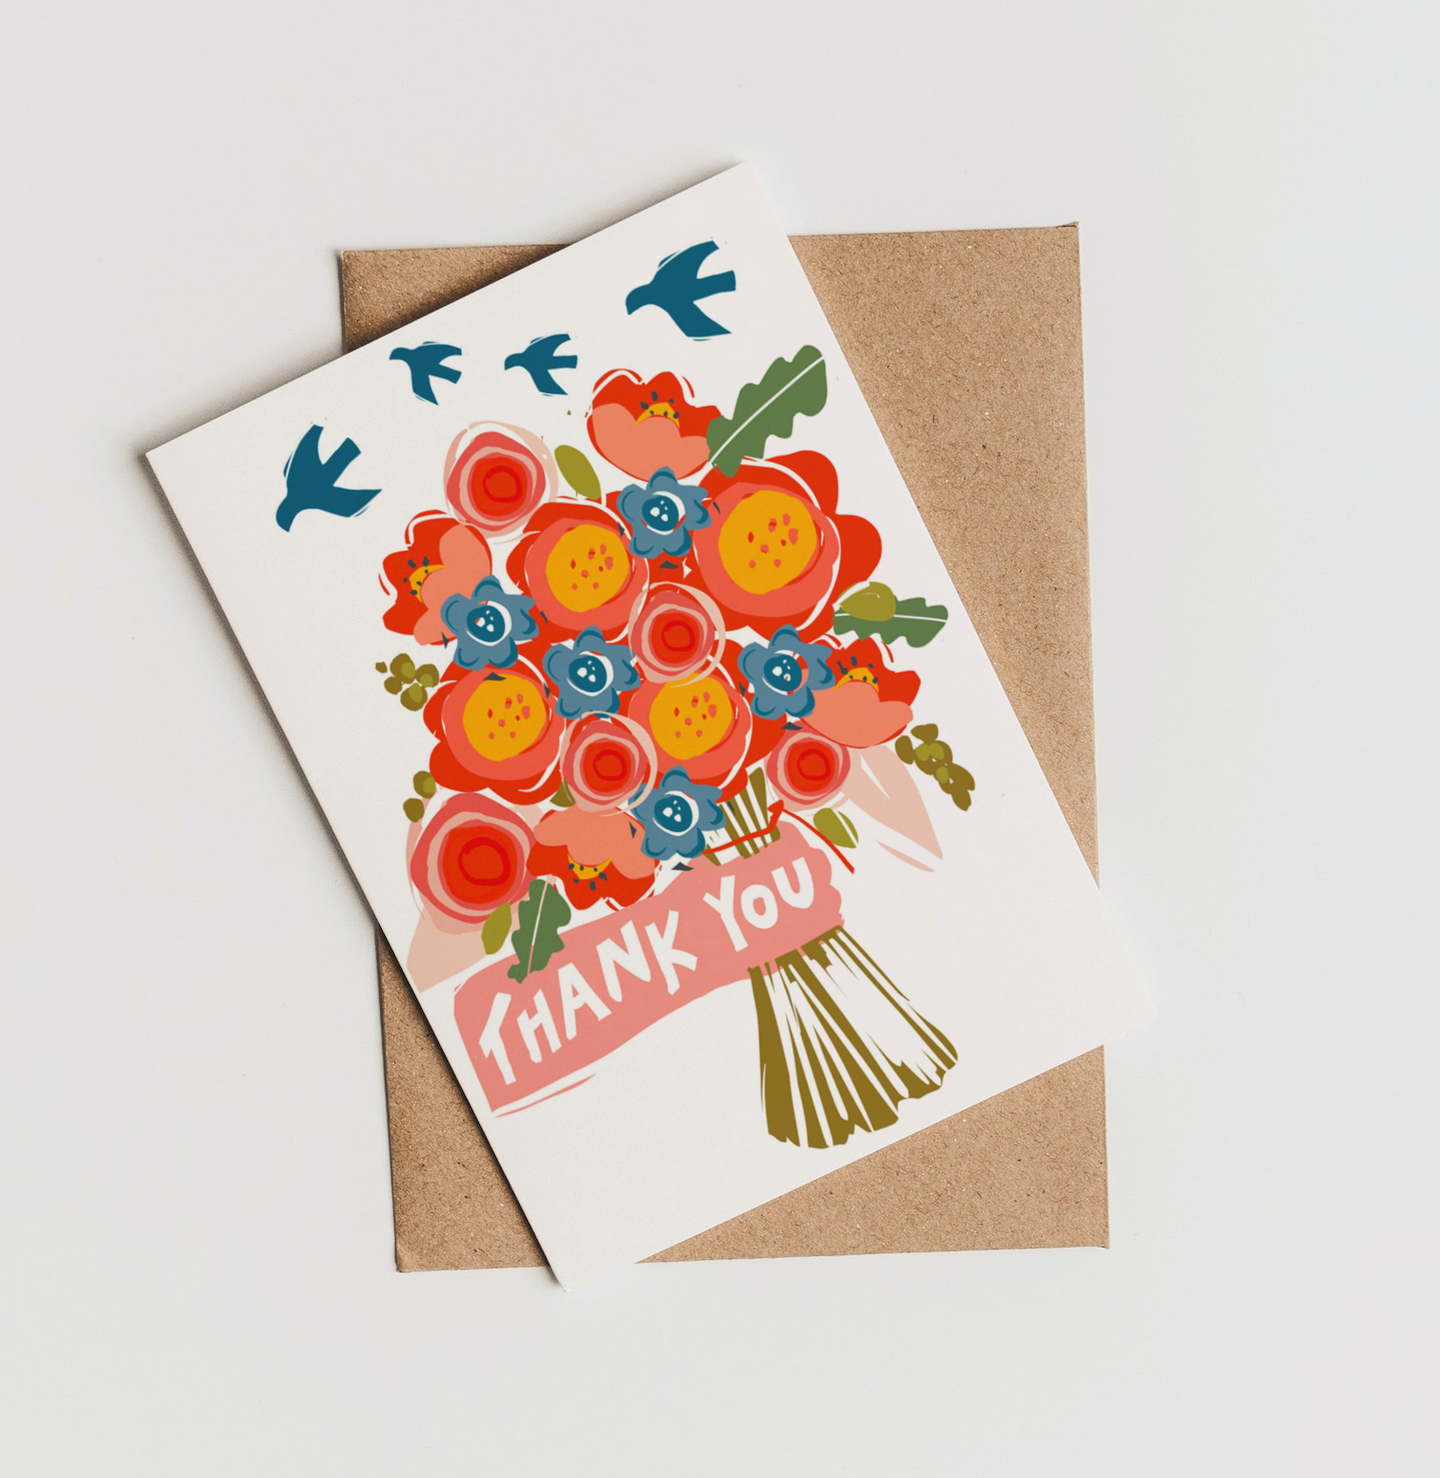 THANK YOU CARD - A THANK YOU GREETING CARD FOR ALL OCASSIONS